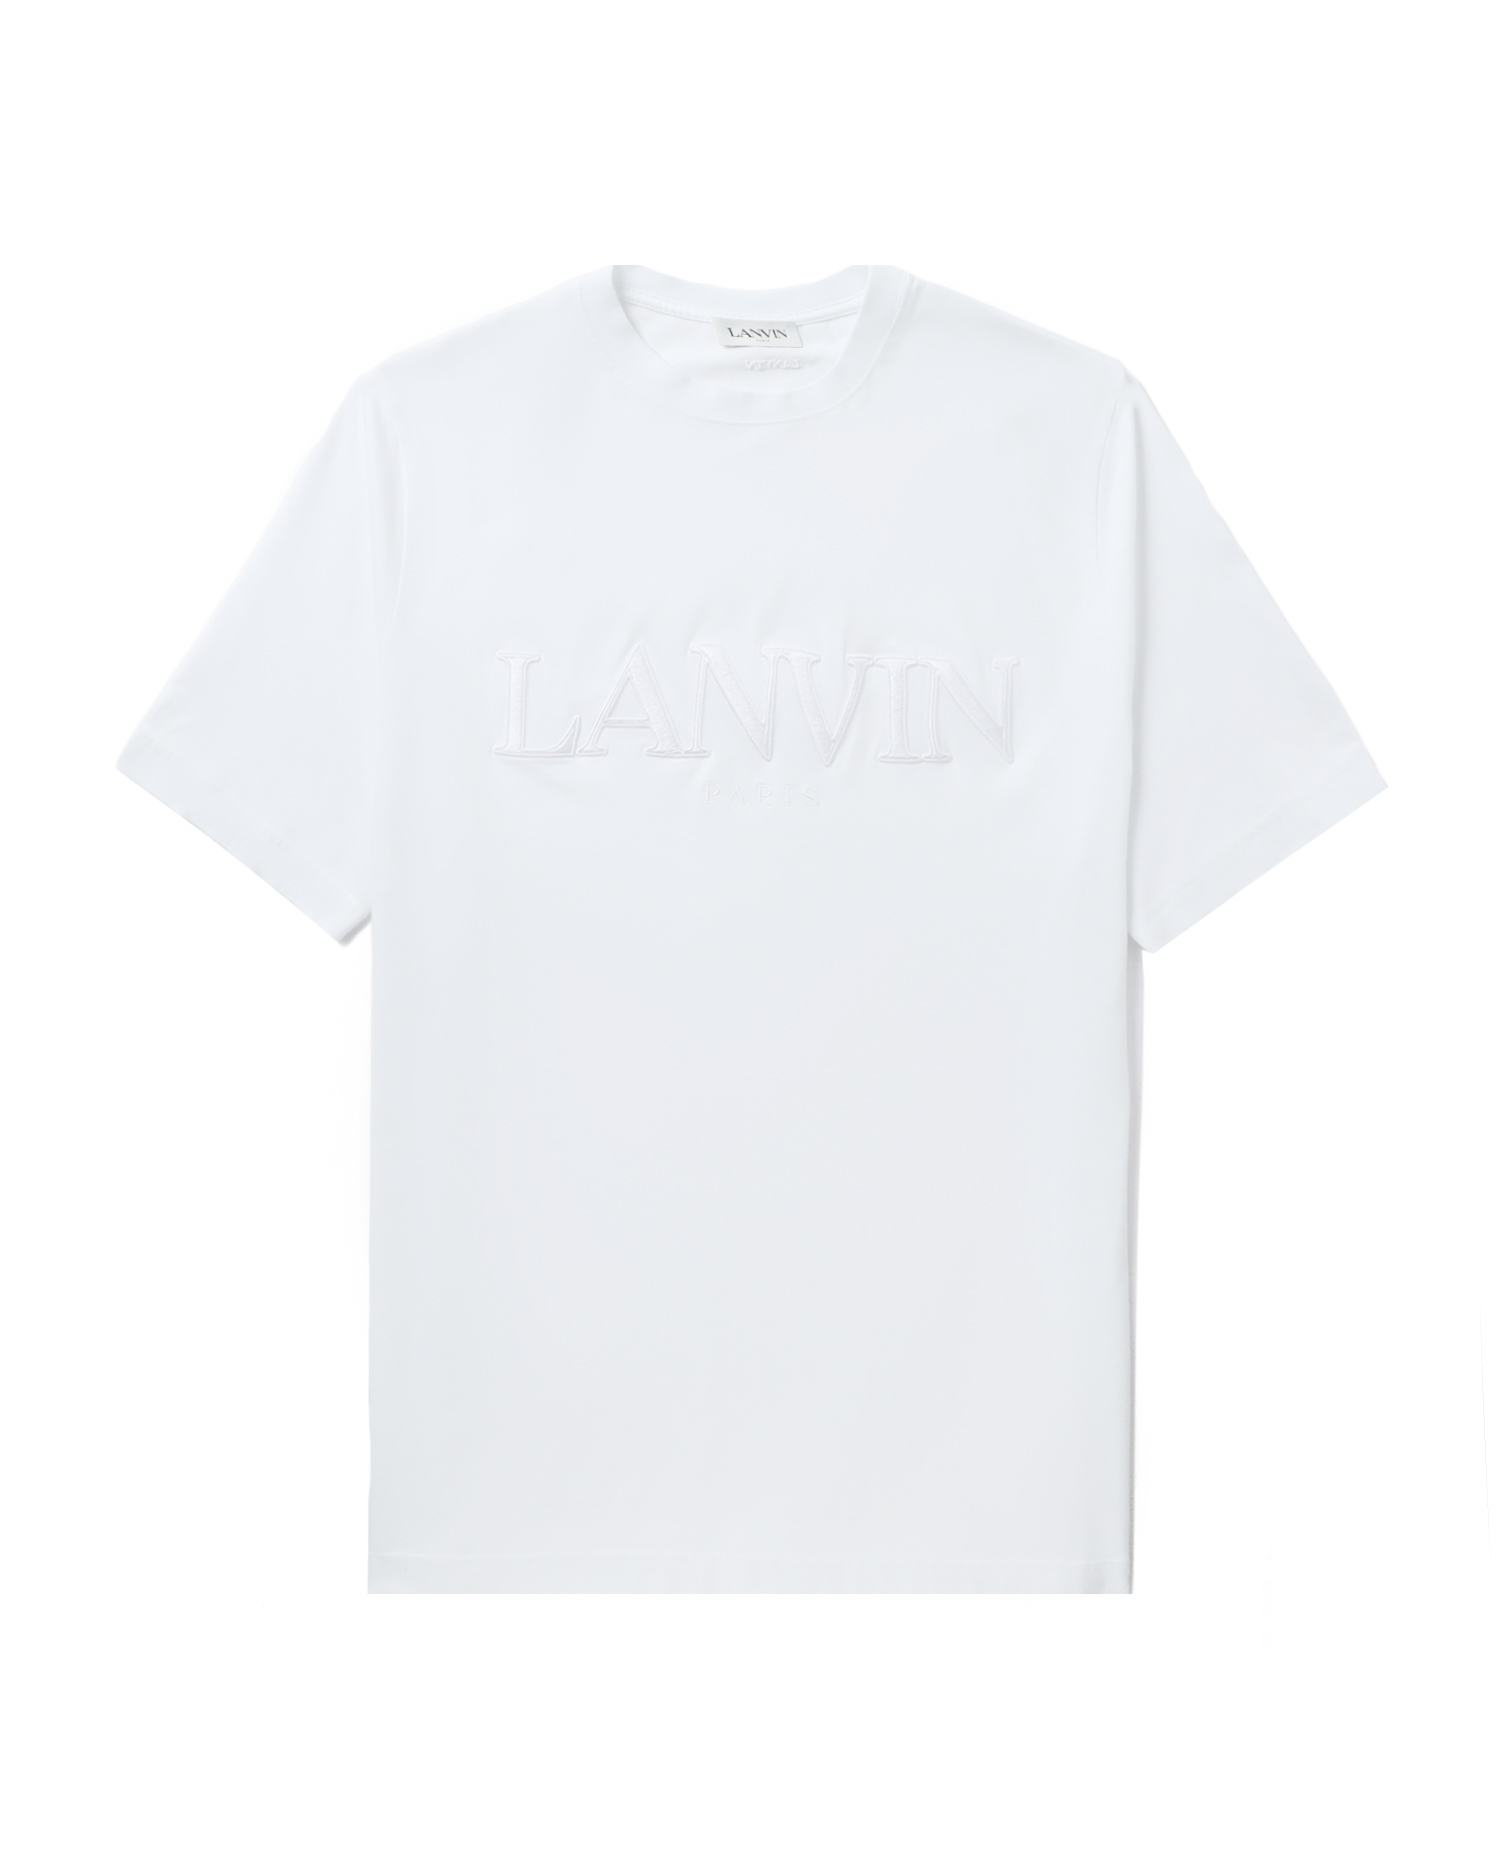 embroidered logo tee